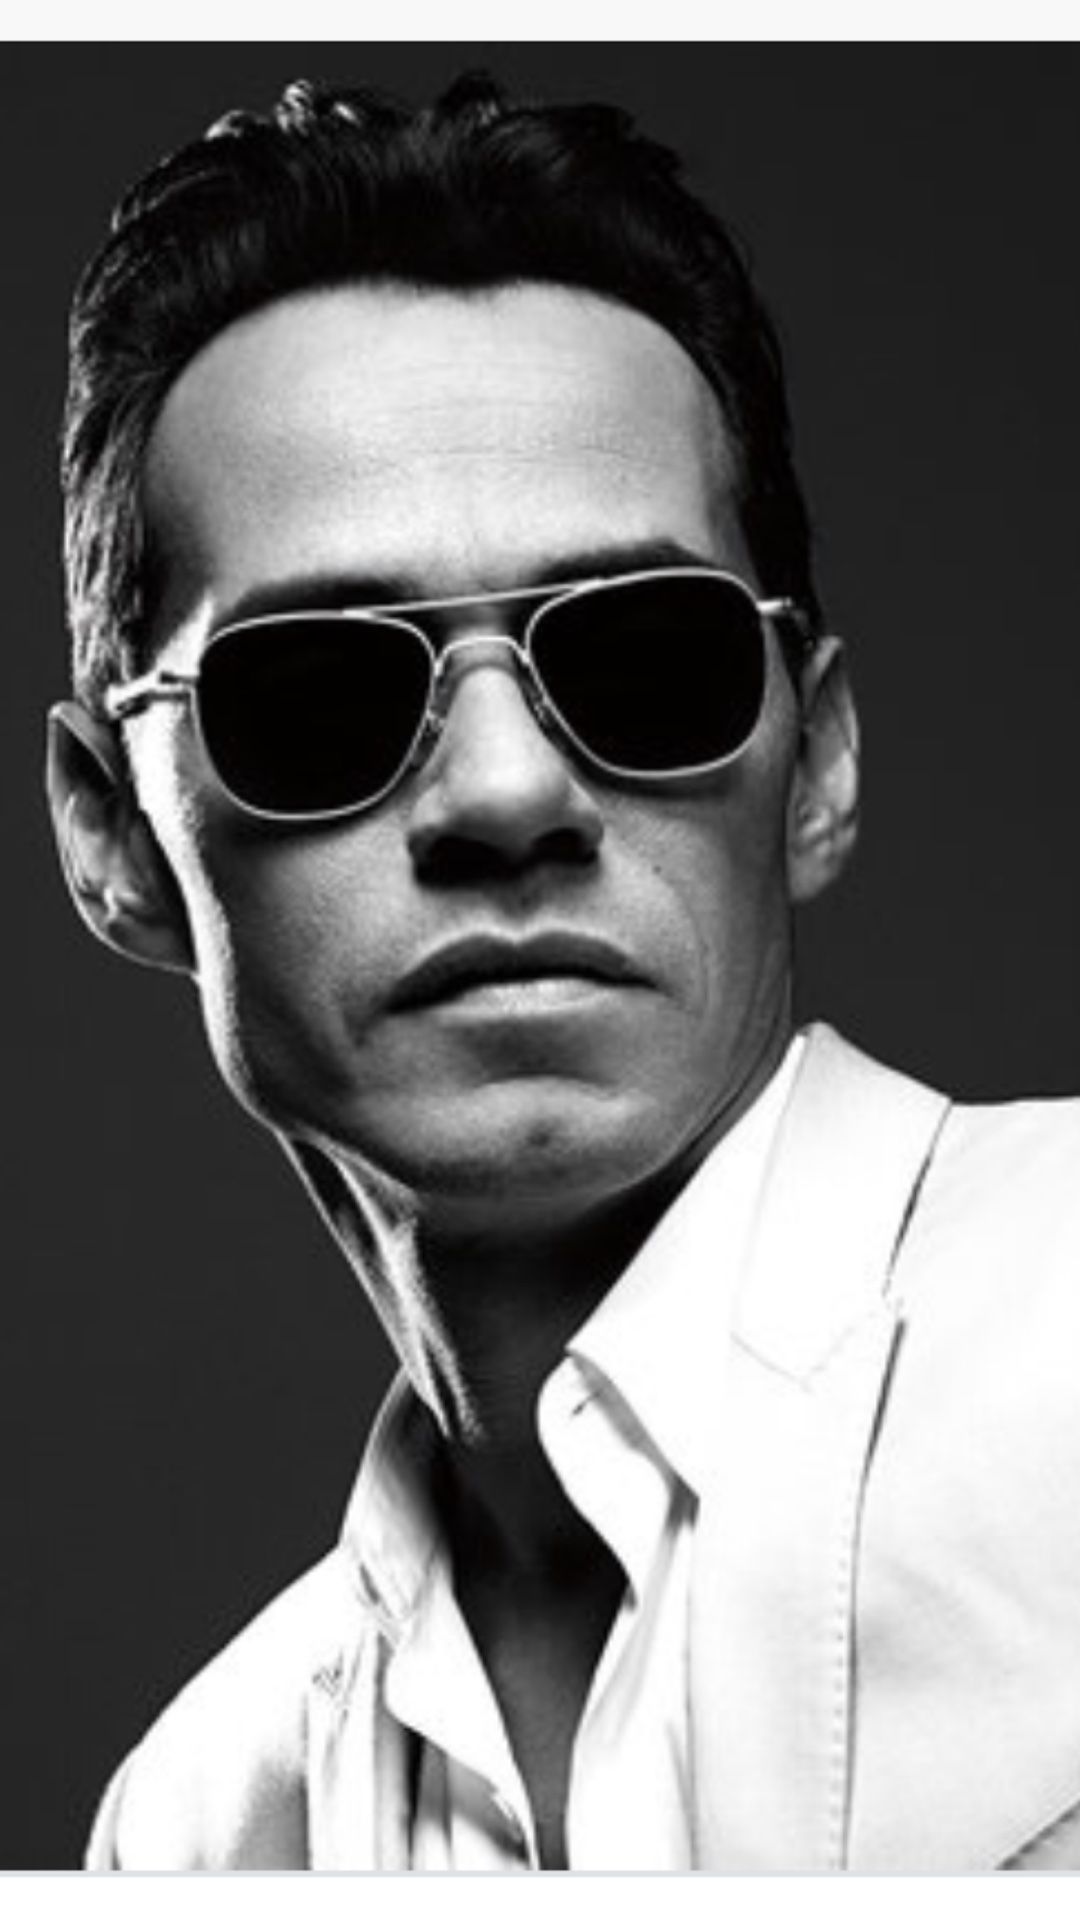 Marc Anthony tickets for sale